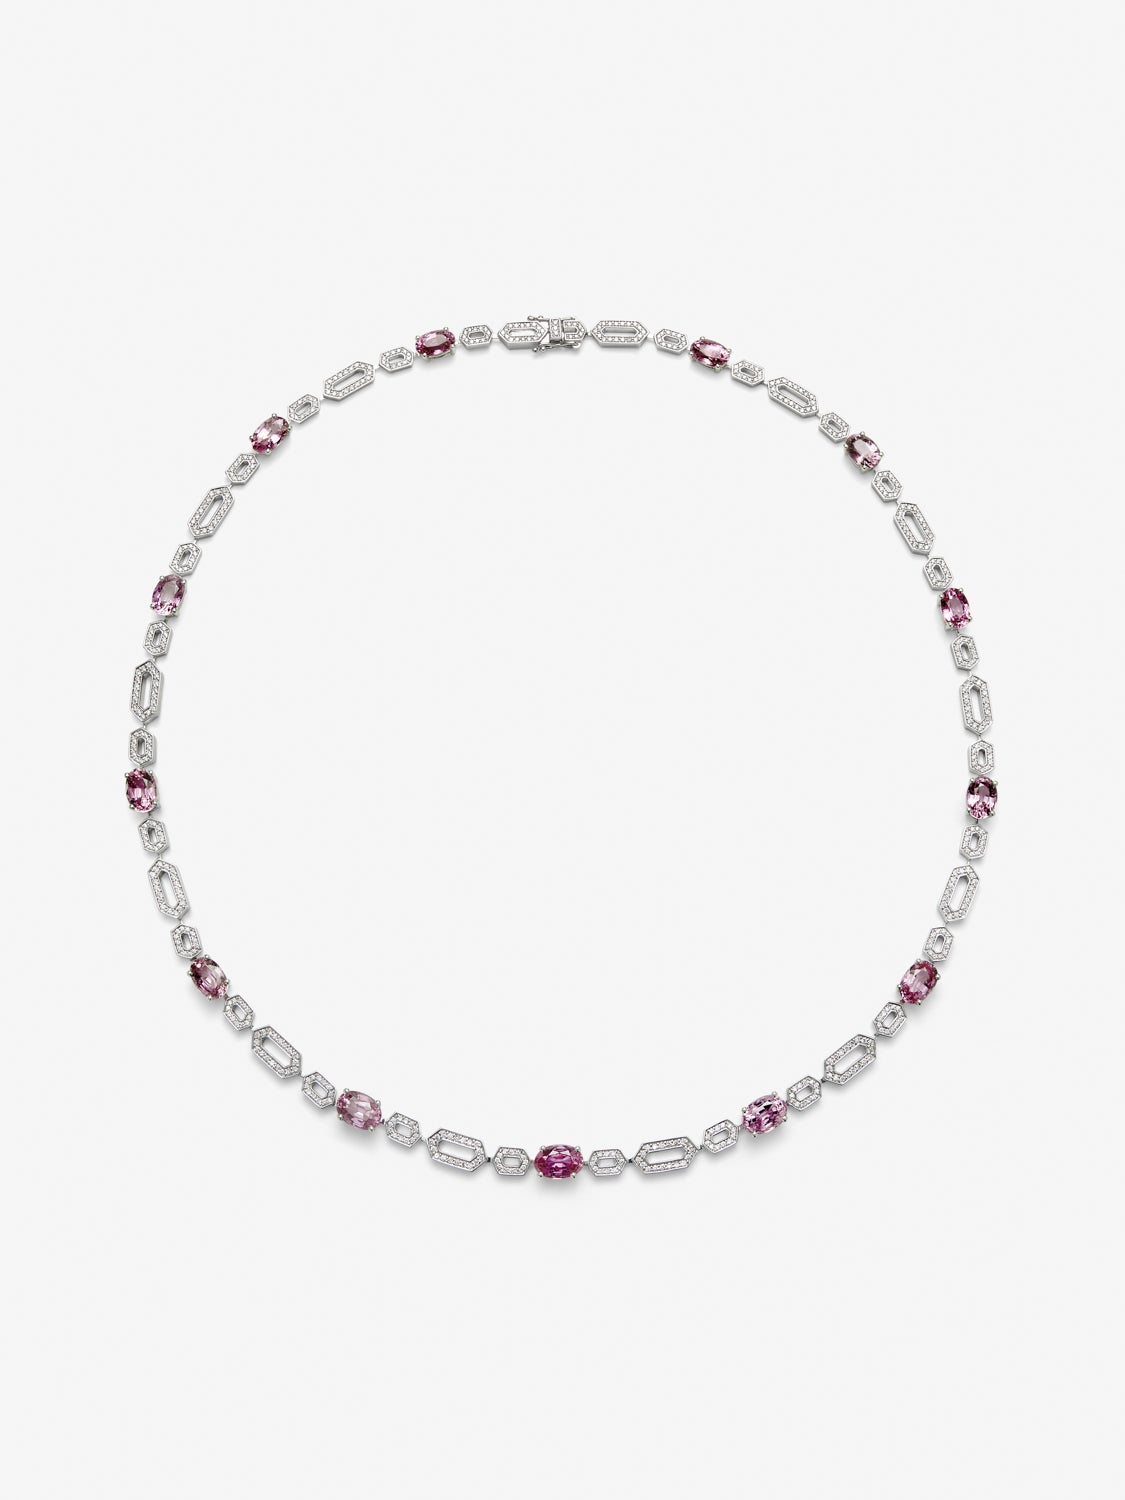 18K white gold necklace with vivid pink sapphires in oval cut of 14.43 cts and brilliant cut diamonds of 1.73 cts